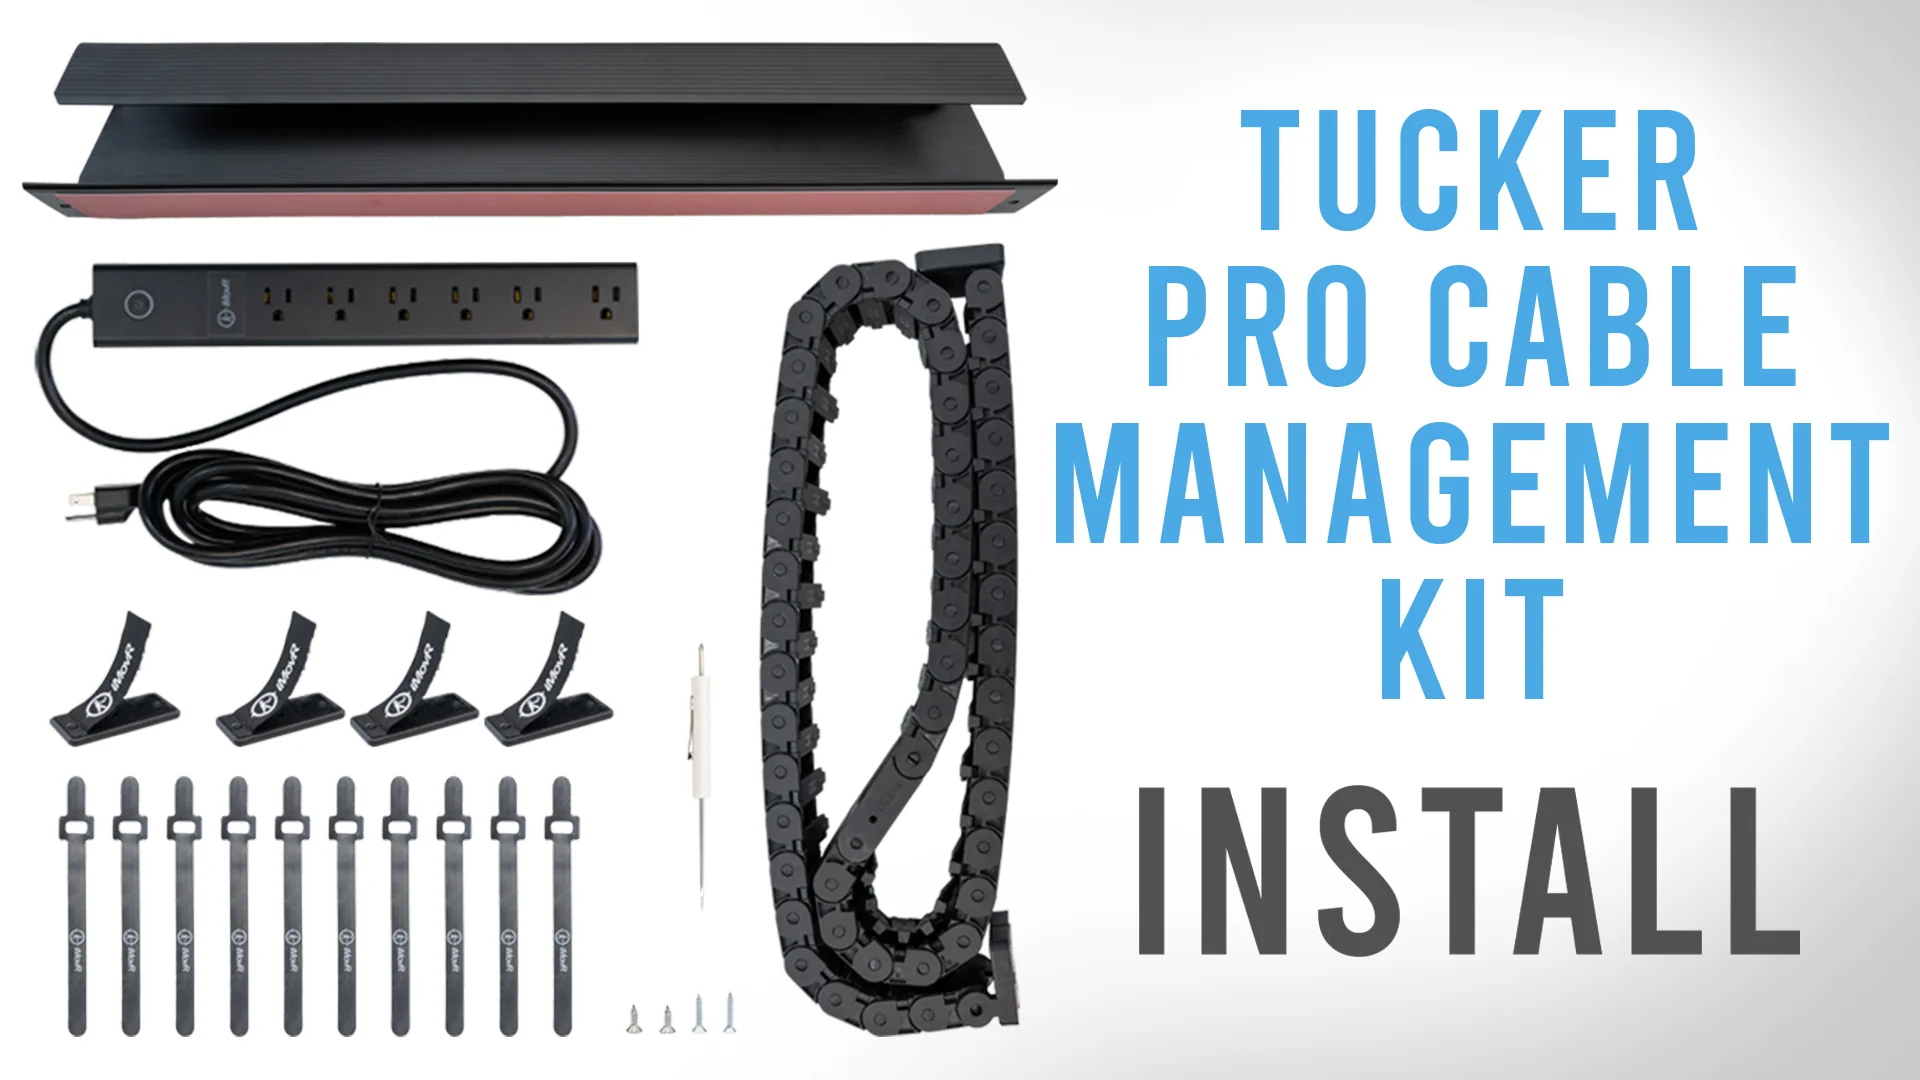 Tucker Pro Cable Management Kit Install on Vimeo